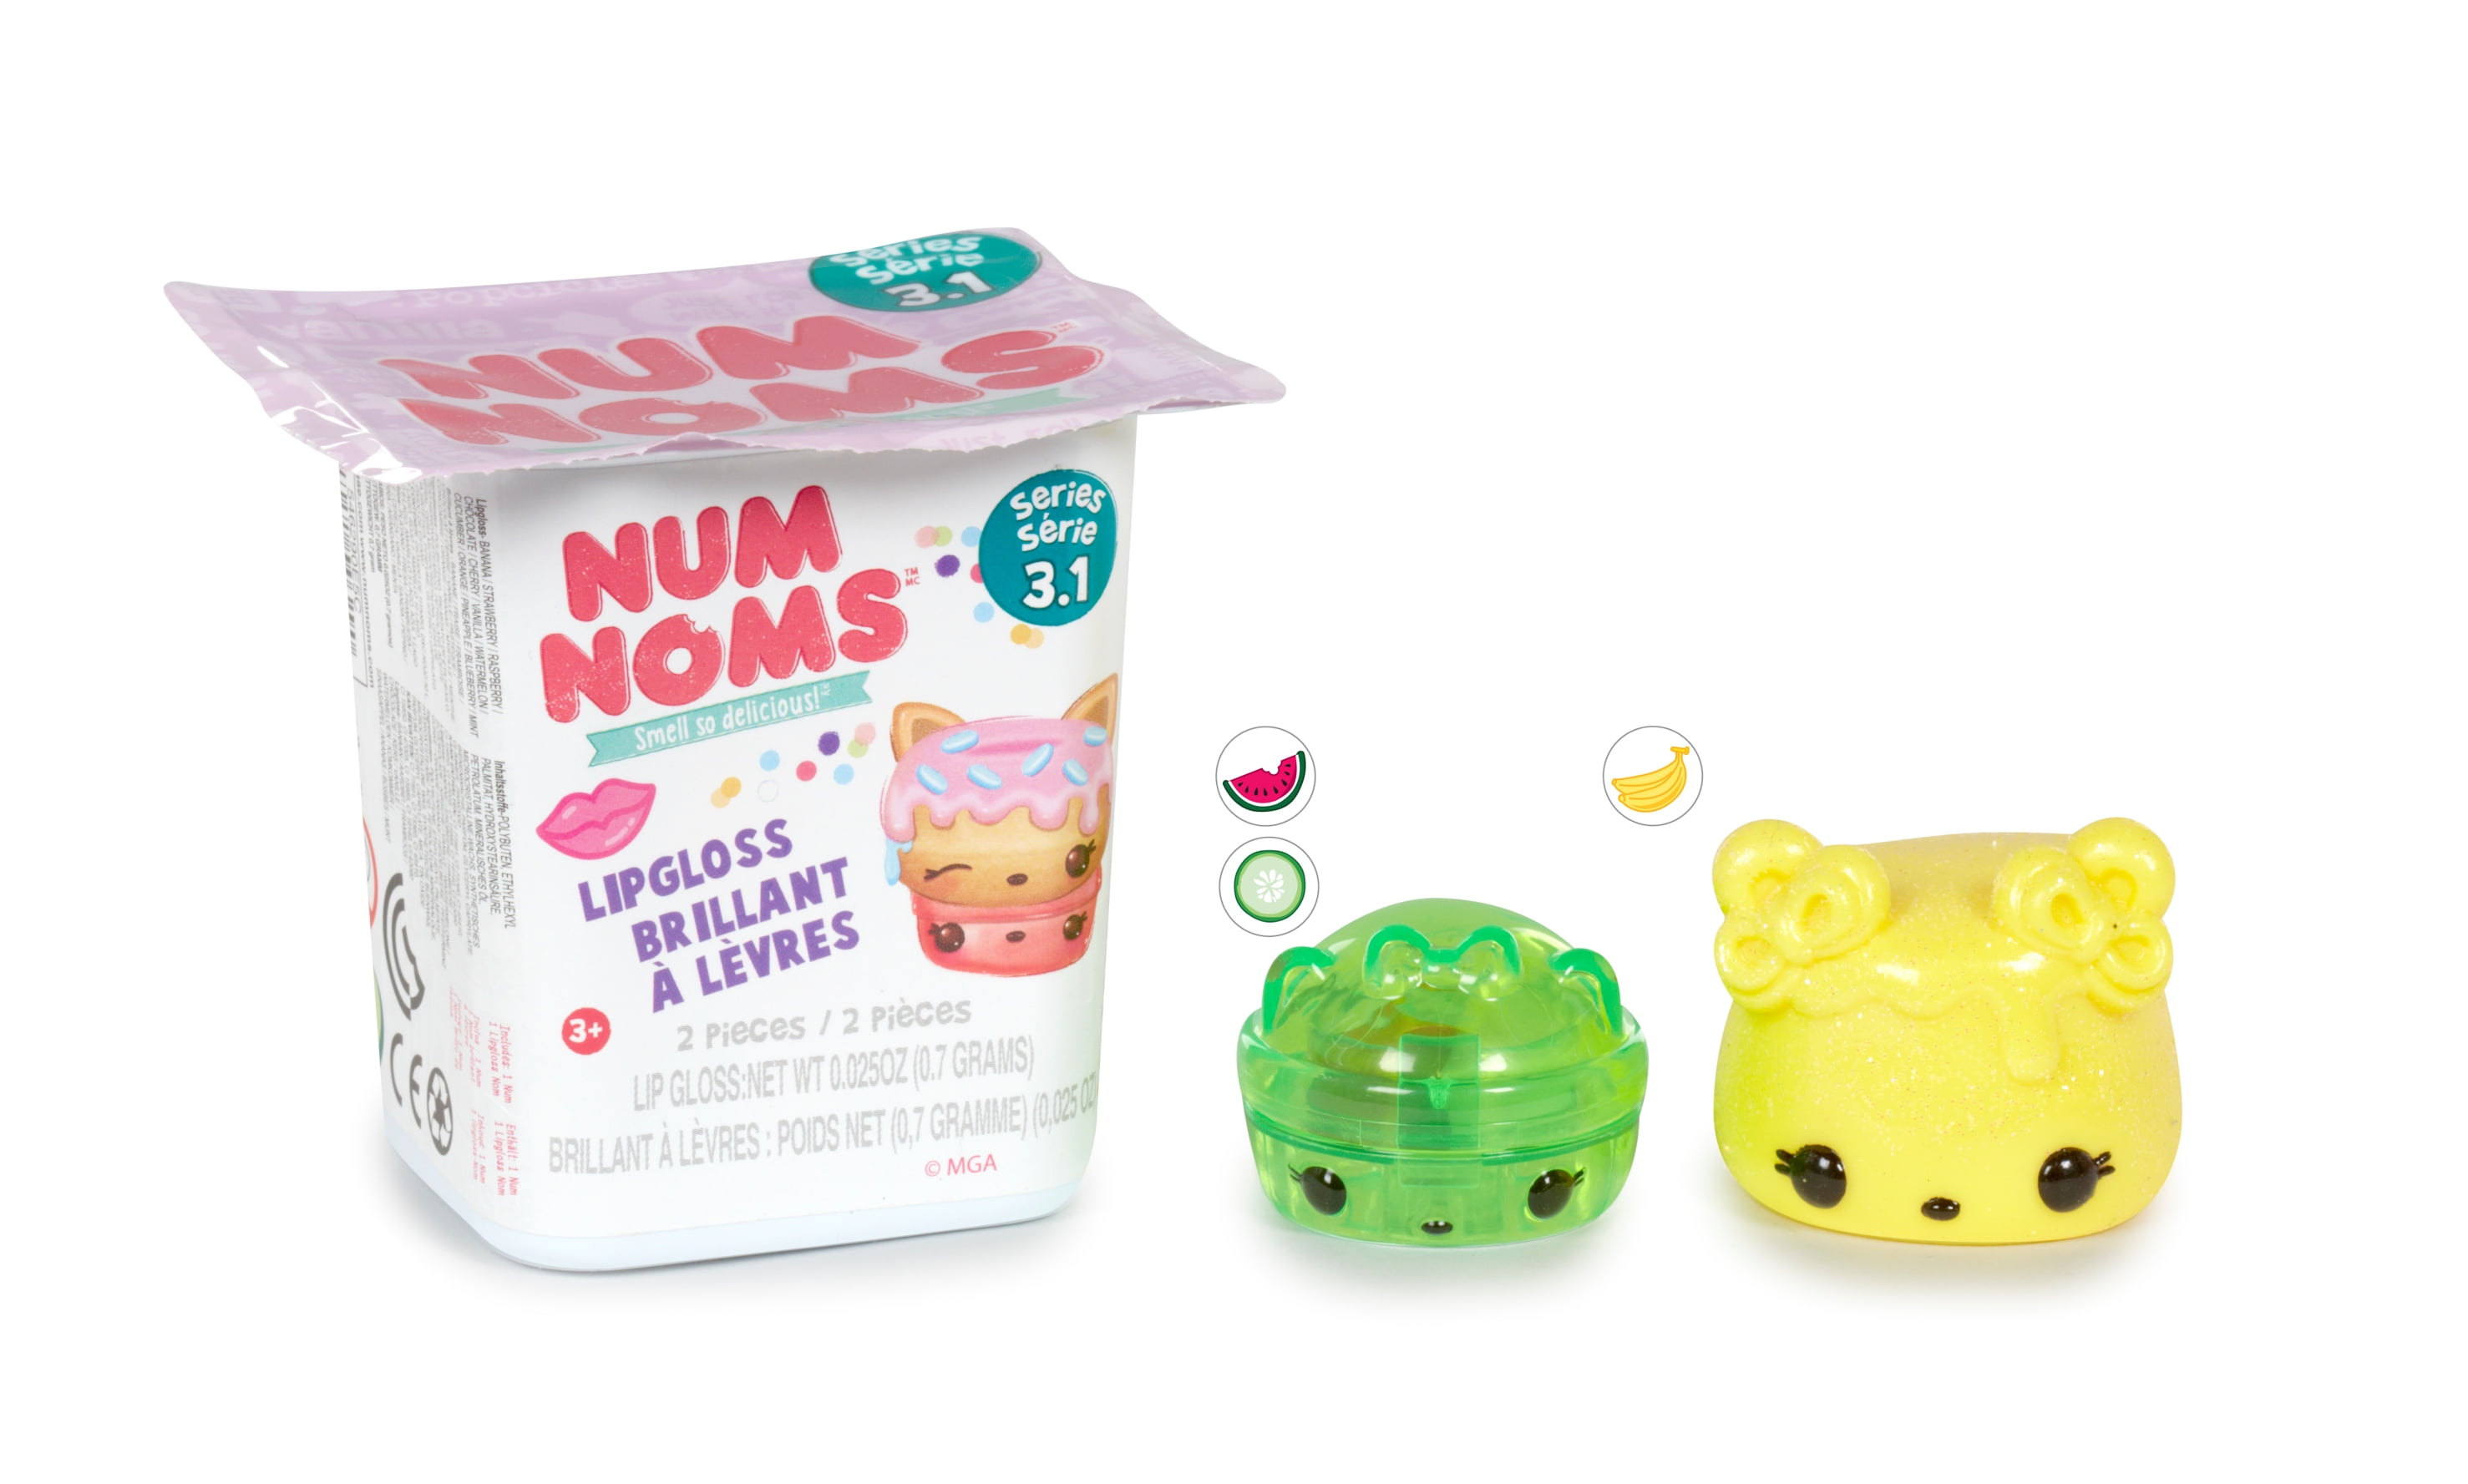 Num Noms - Mystery Pack Series 3.1